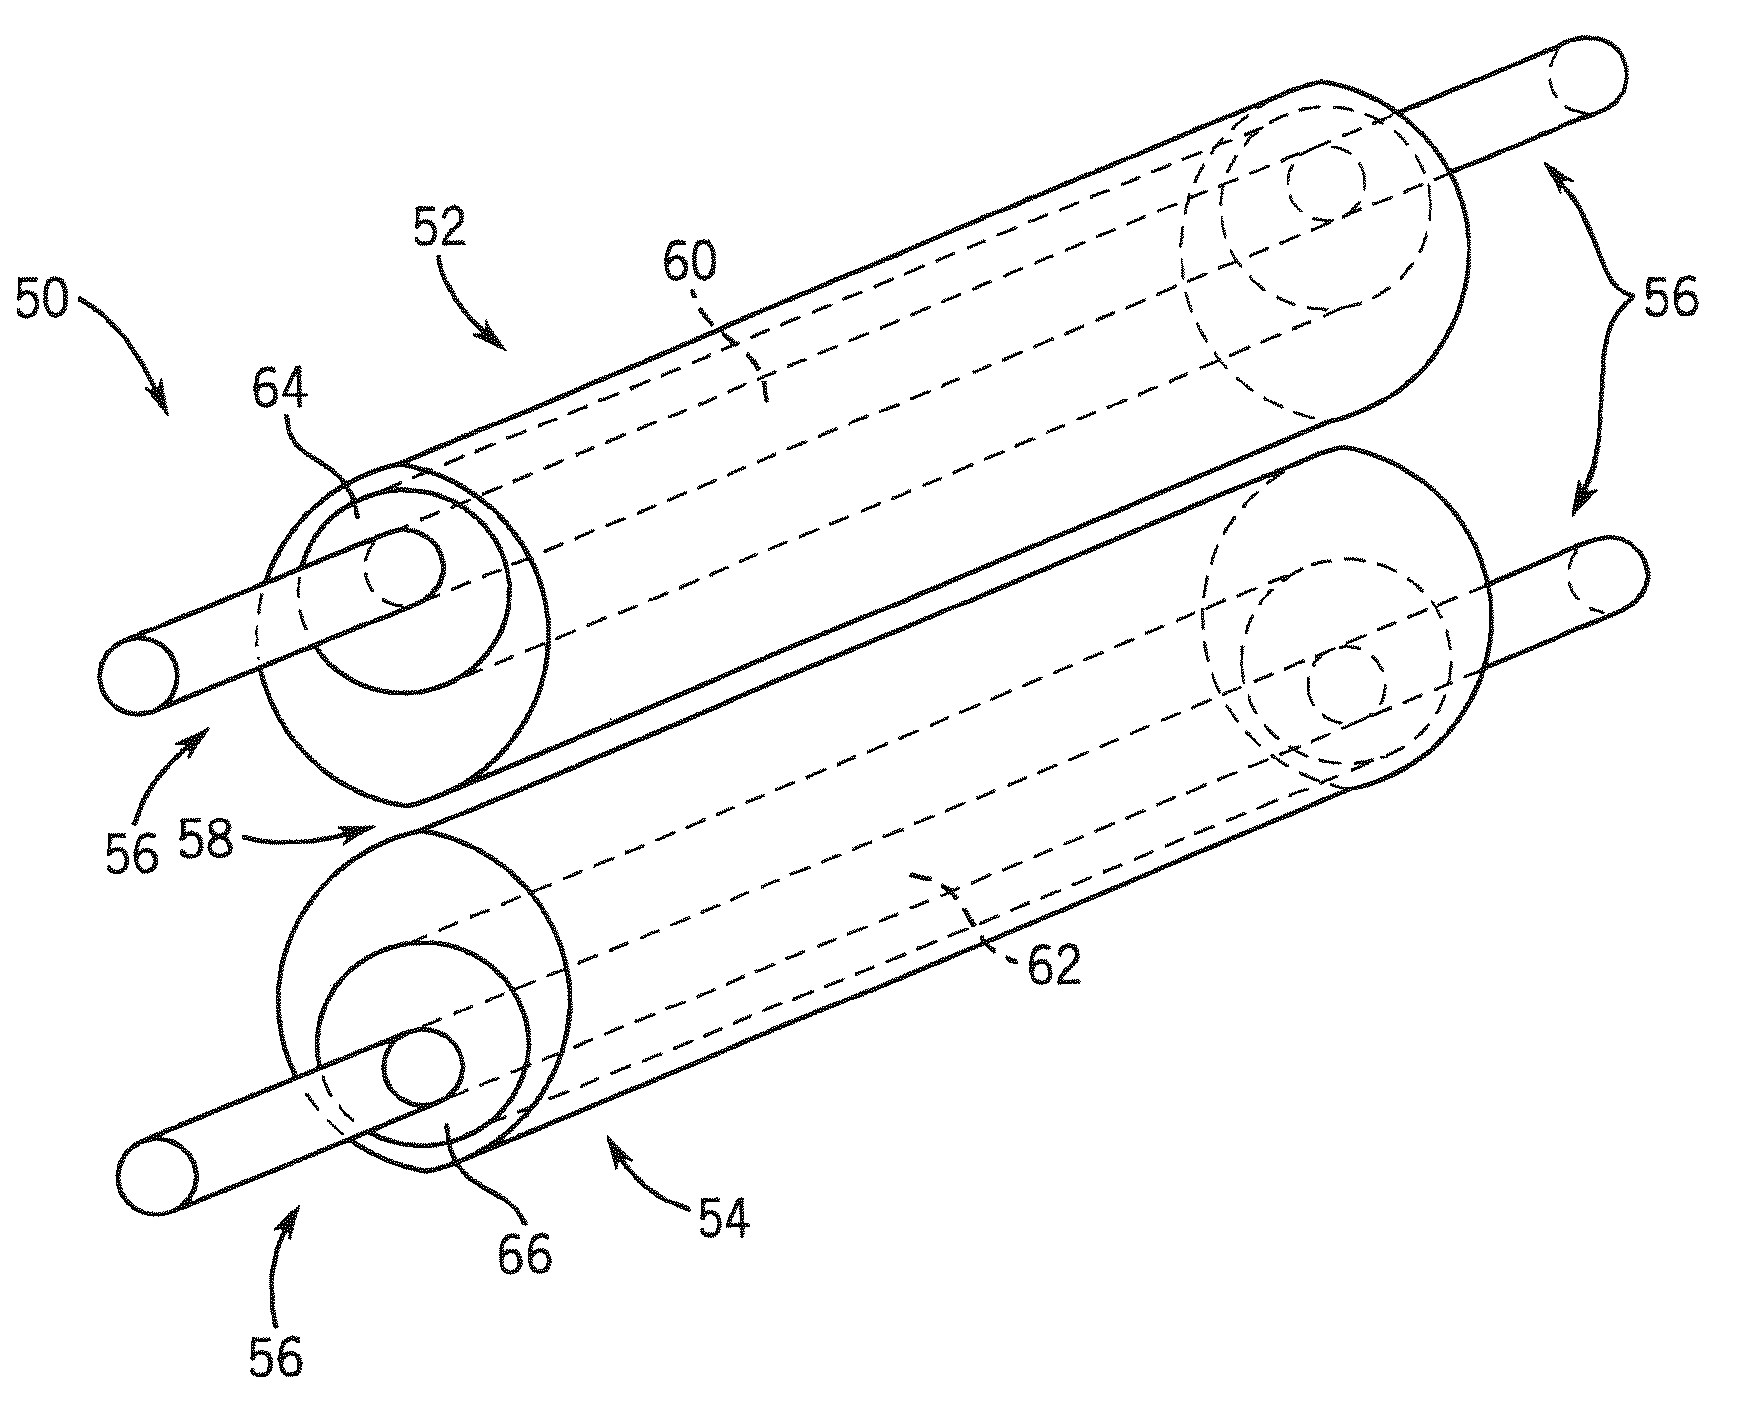 Method of manufacturing, and a collimator mandrel having variable attenuation characteristics for a CT system